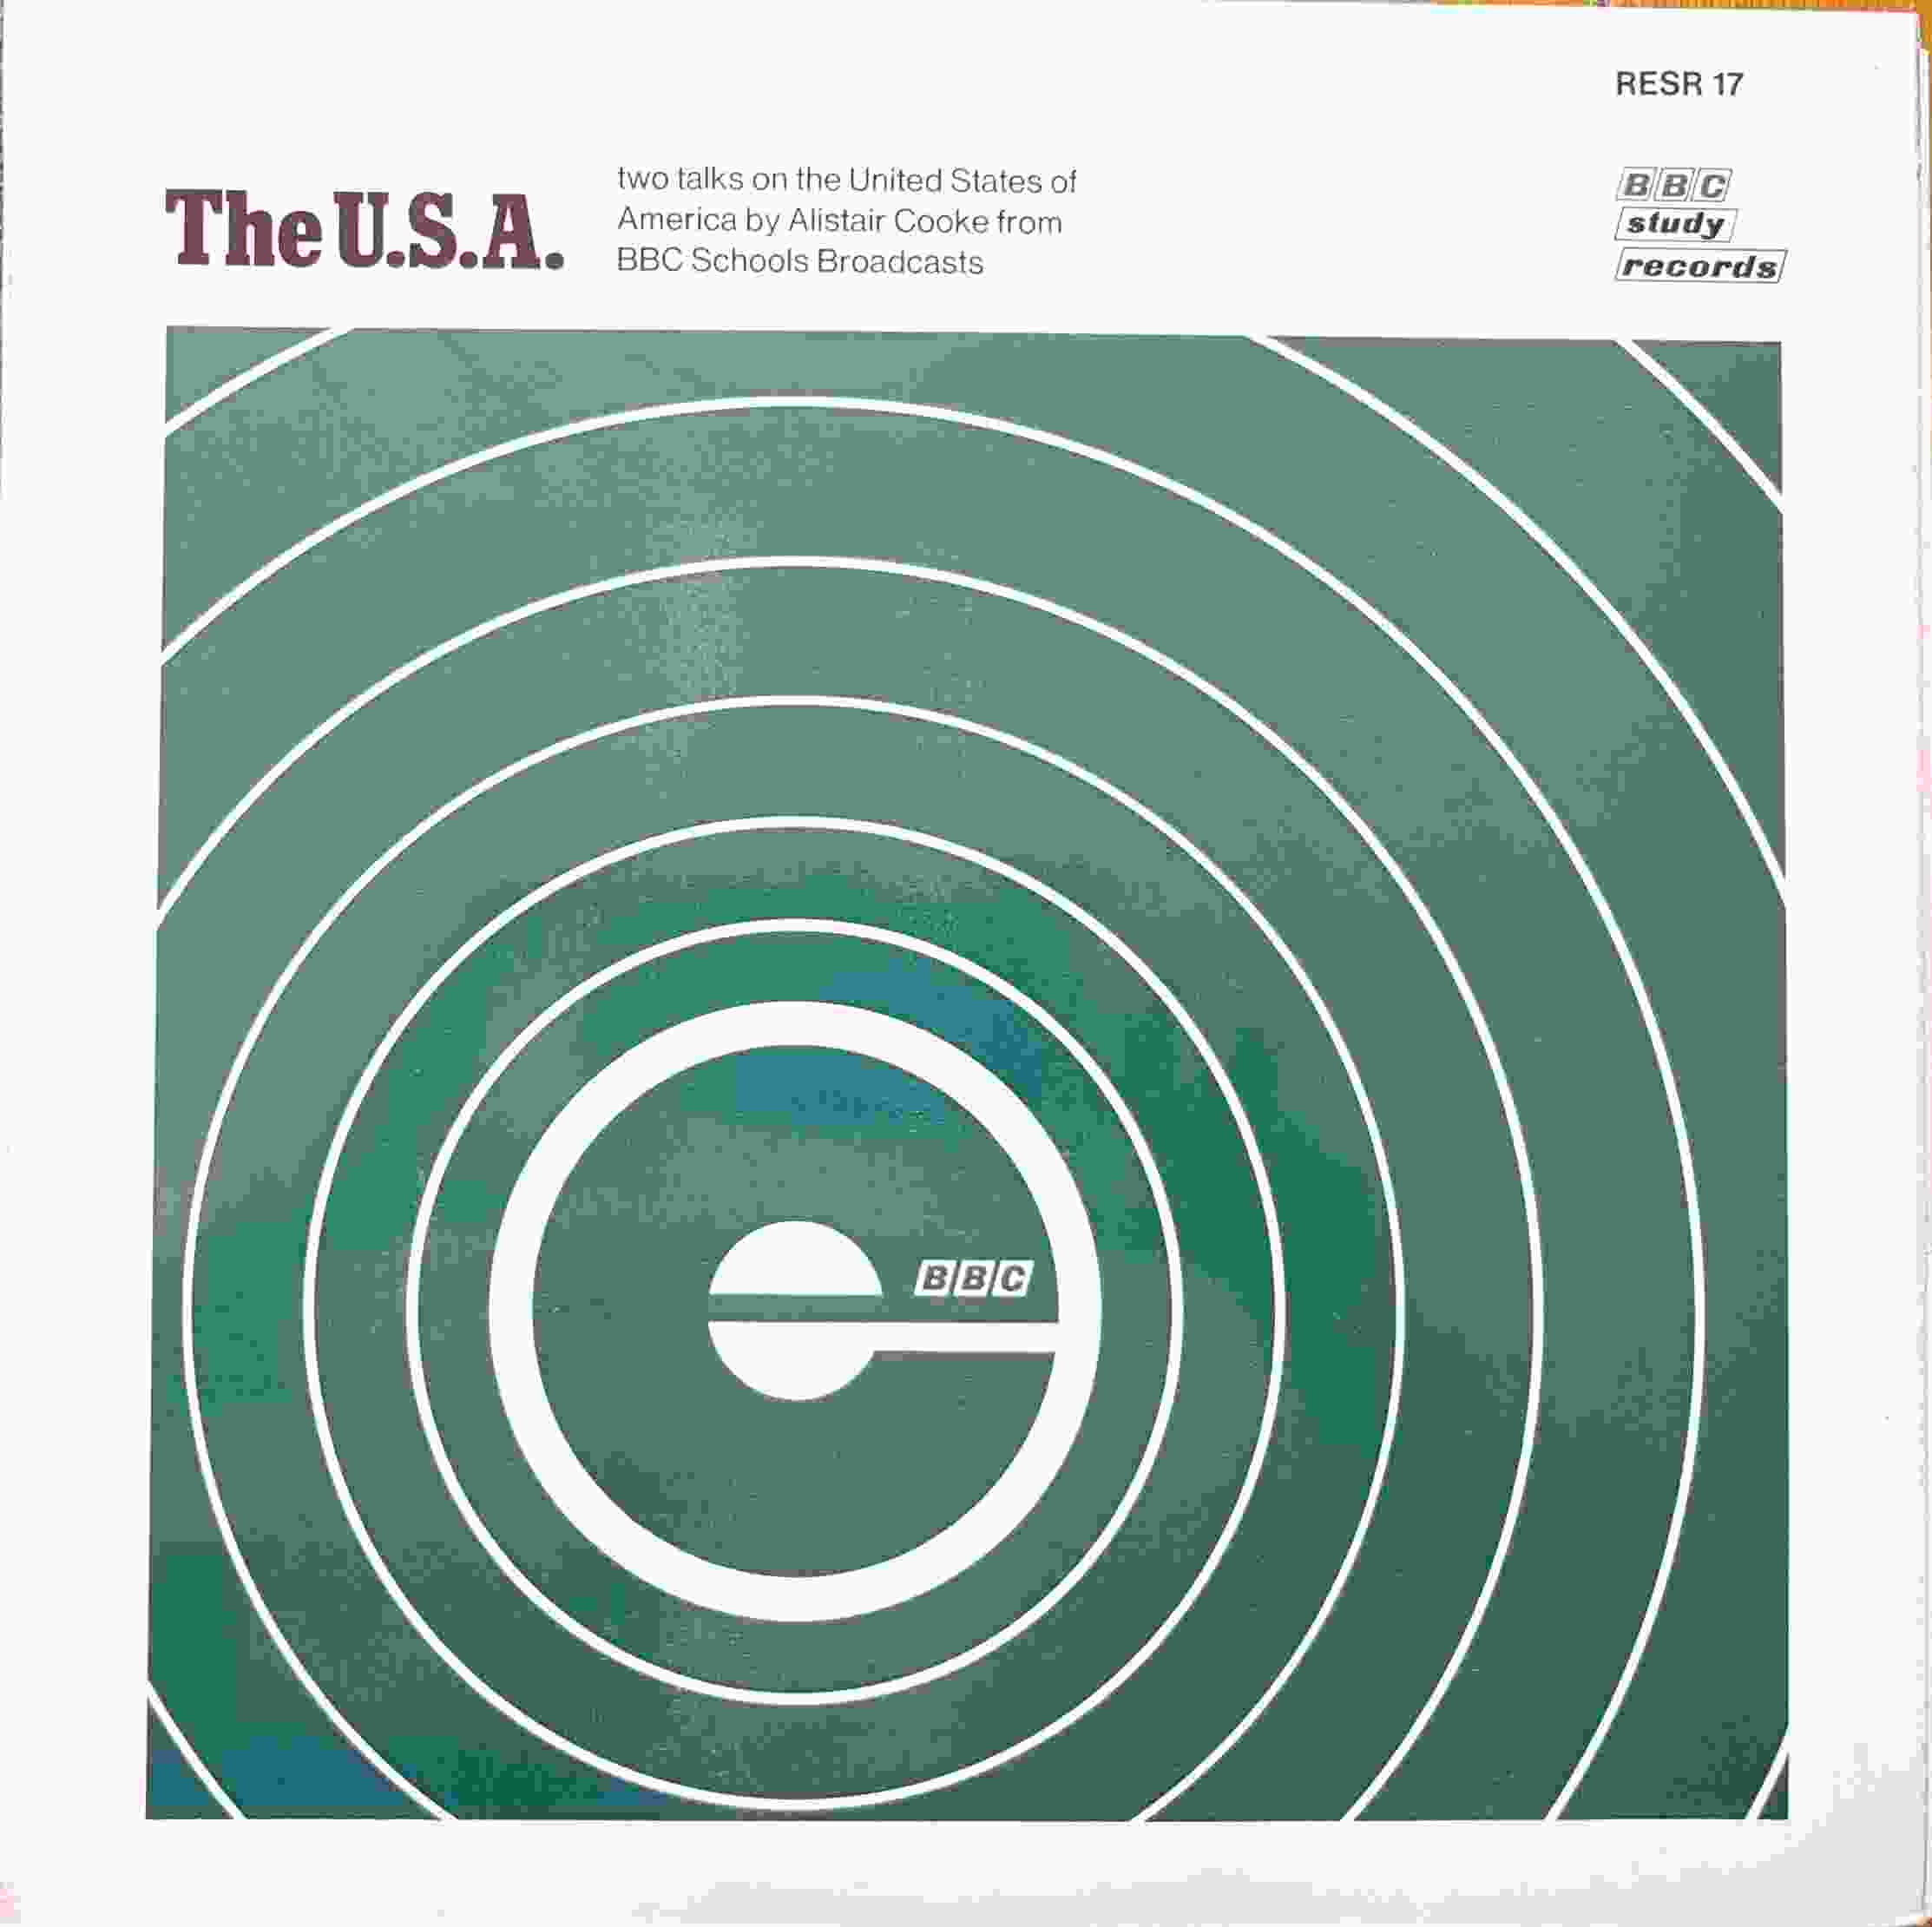 Picture of RESR 17 The U. S. A. by artist Alistair Cooke from the BBC albums - Records and Tapes library